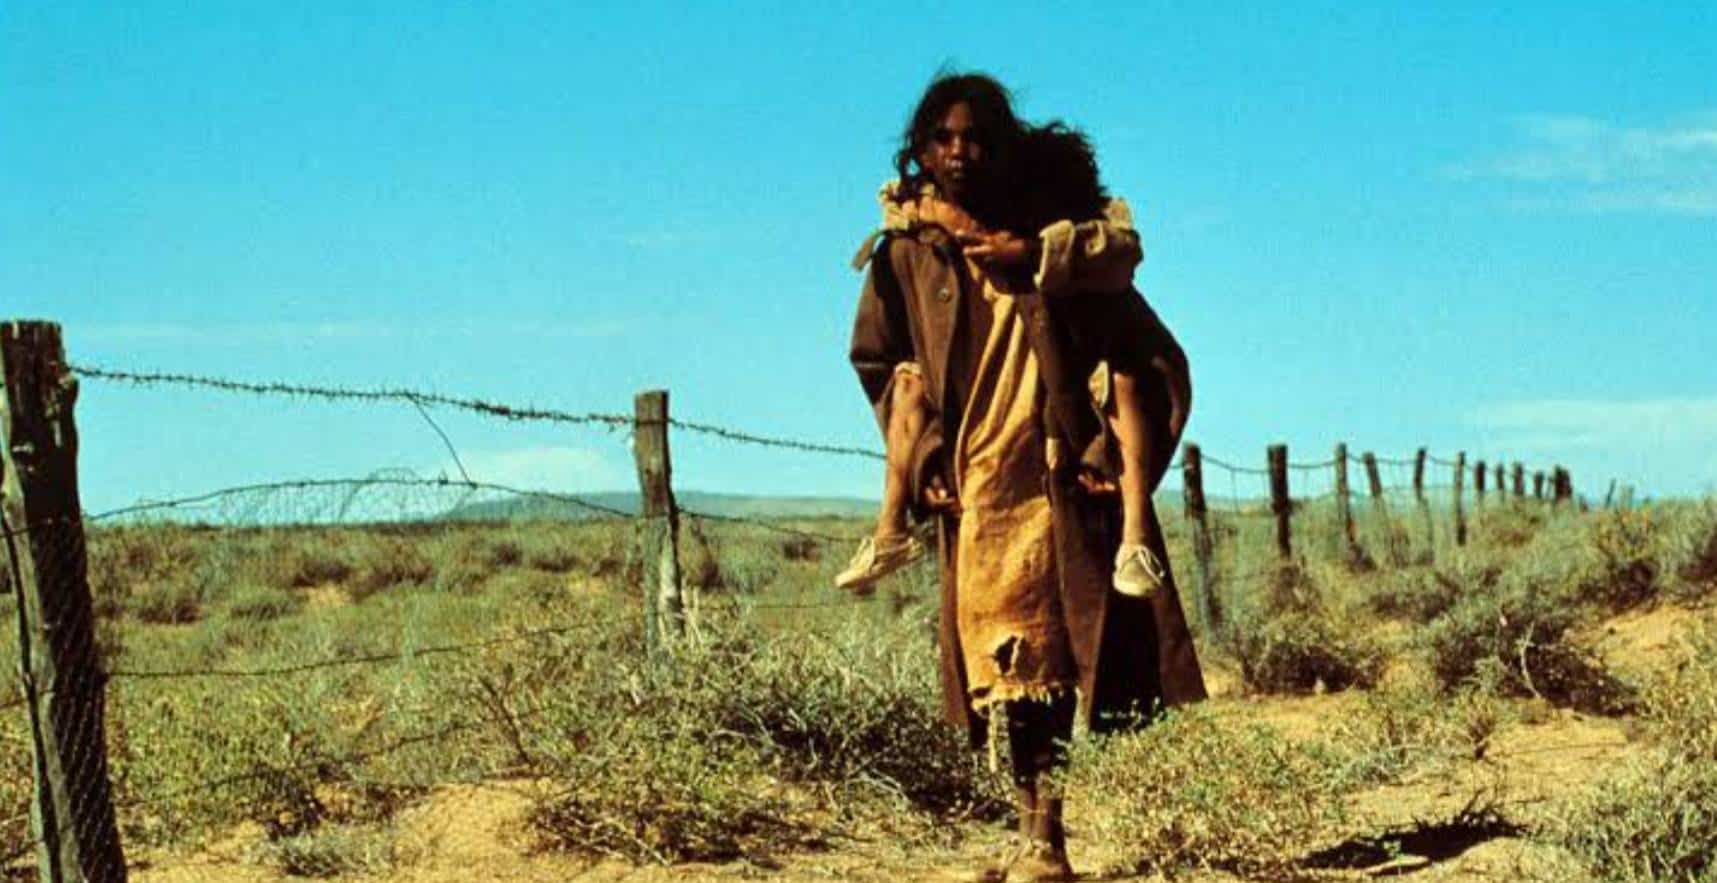 Rabbit Proof Fence- Based On The Struggles Of Two Sisters